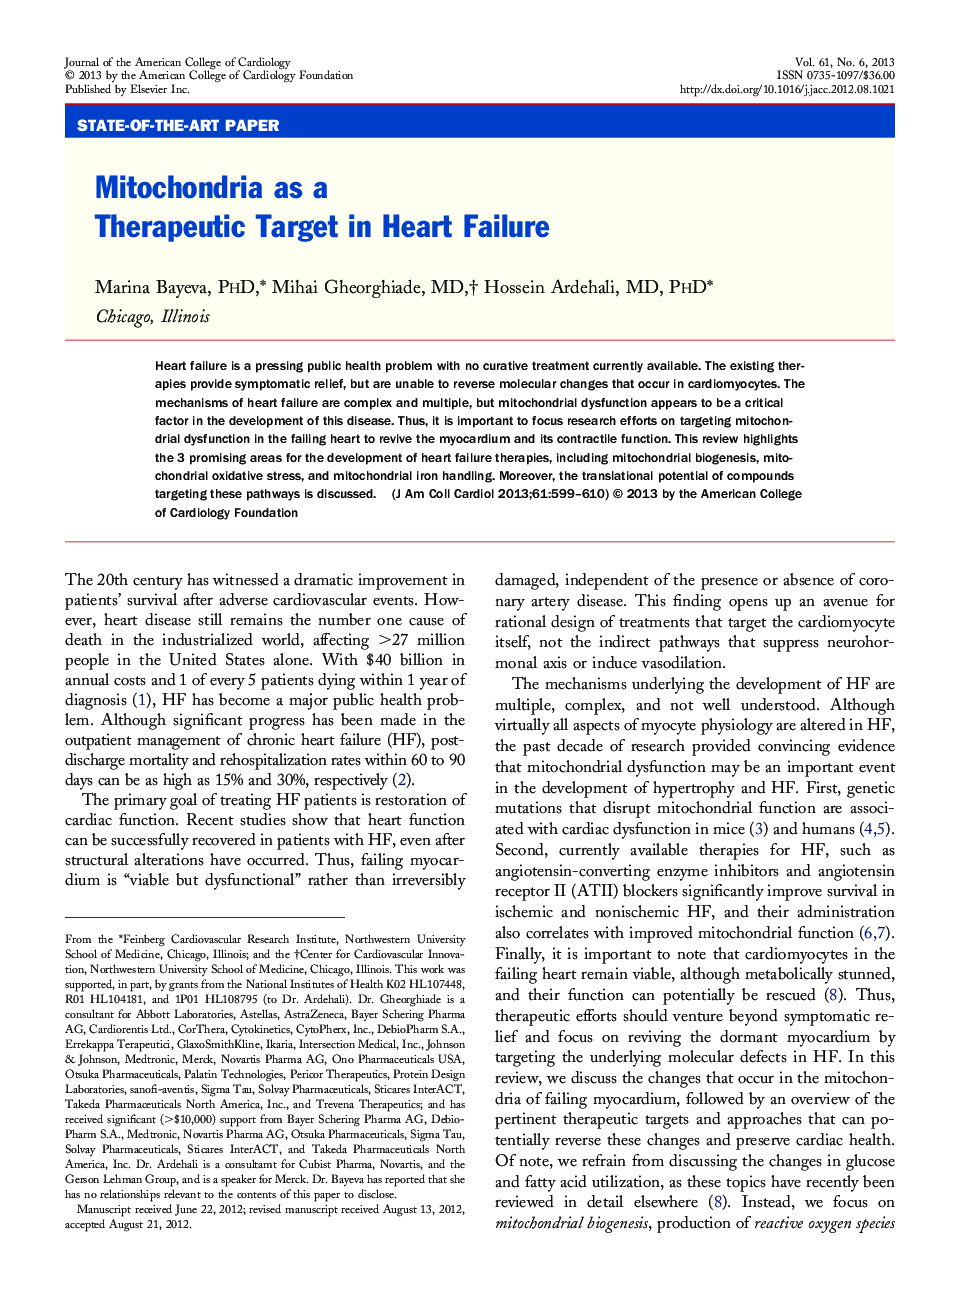 Mitochondria as a Therapeutic Target in Heart Failure 